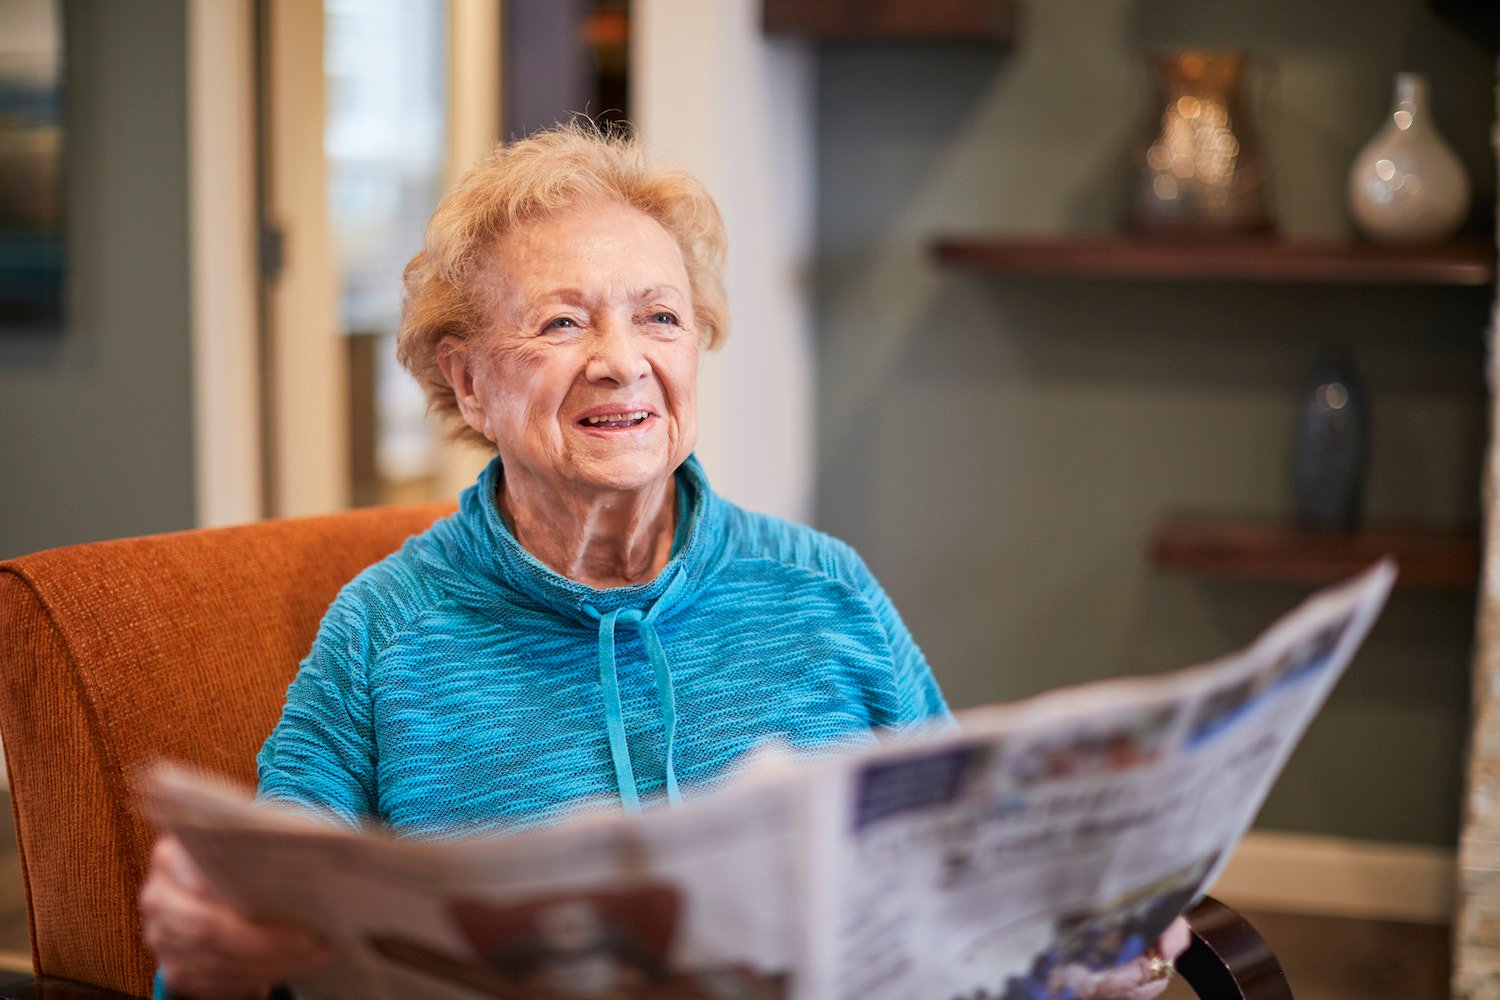 Resident reading a newspaper in a living room chair